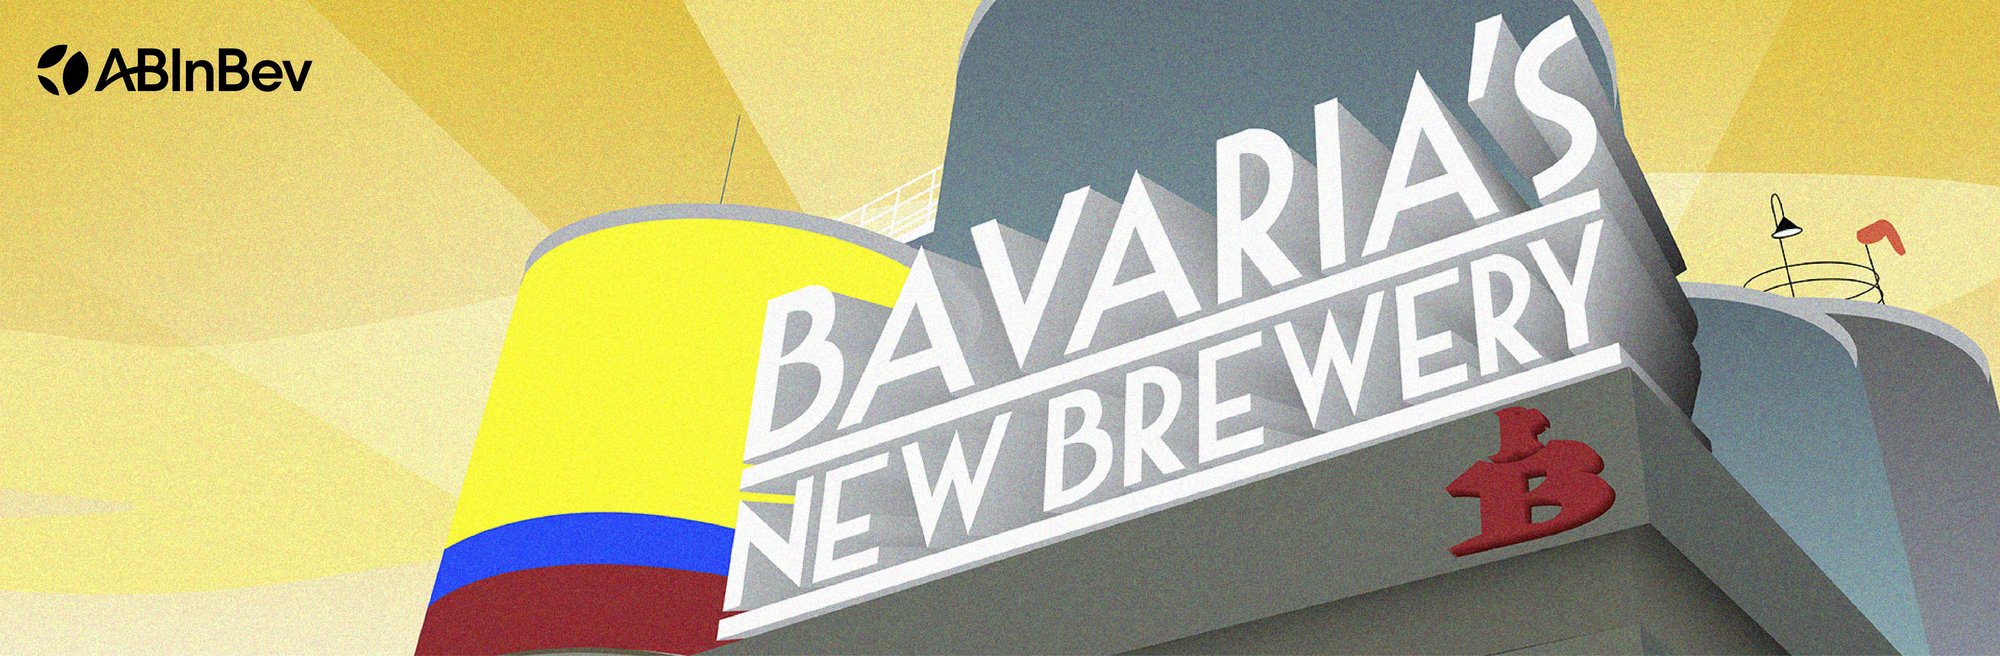 Colombia’s Bavaria invests $413 million in new brewery to drive long-term growth